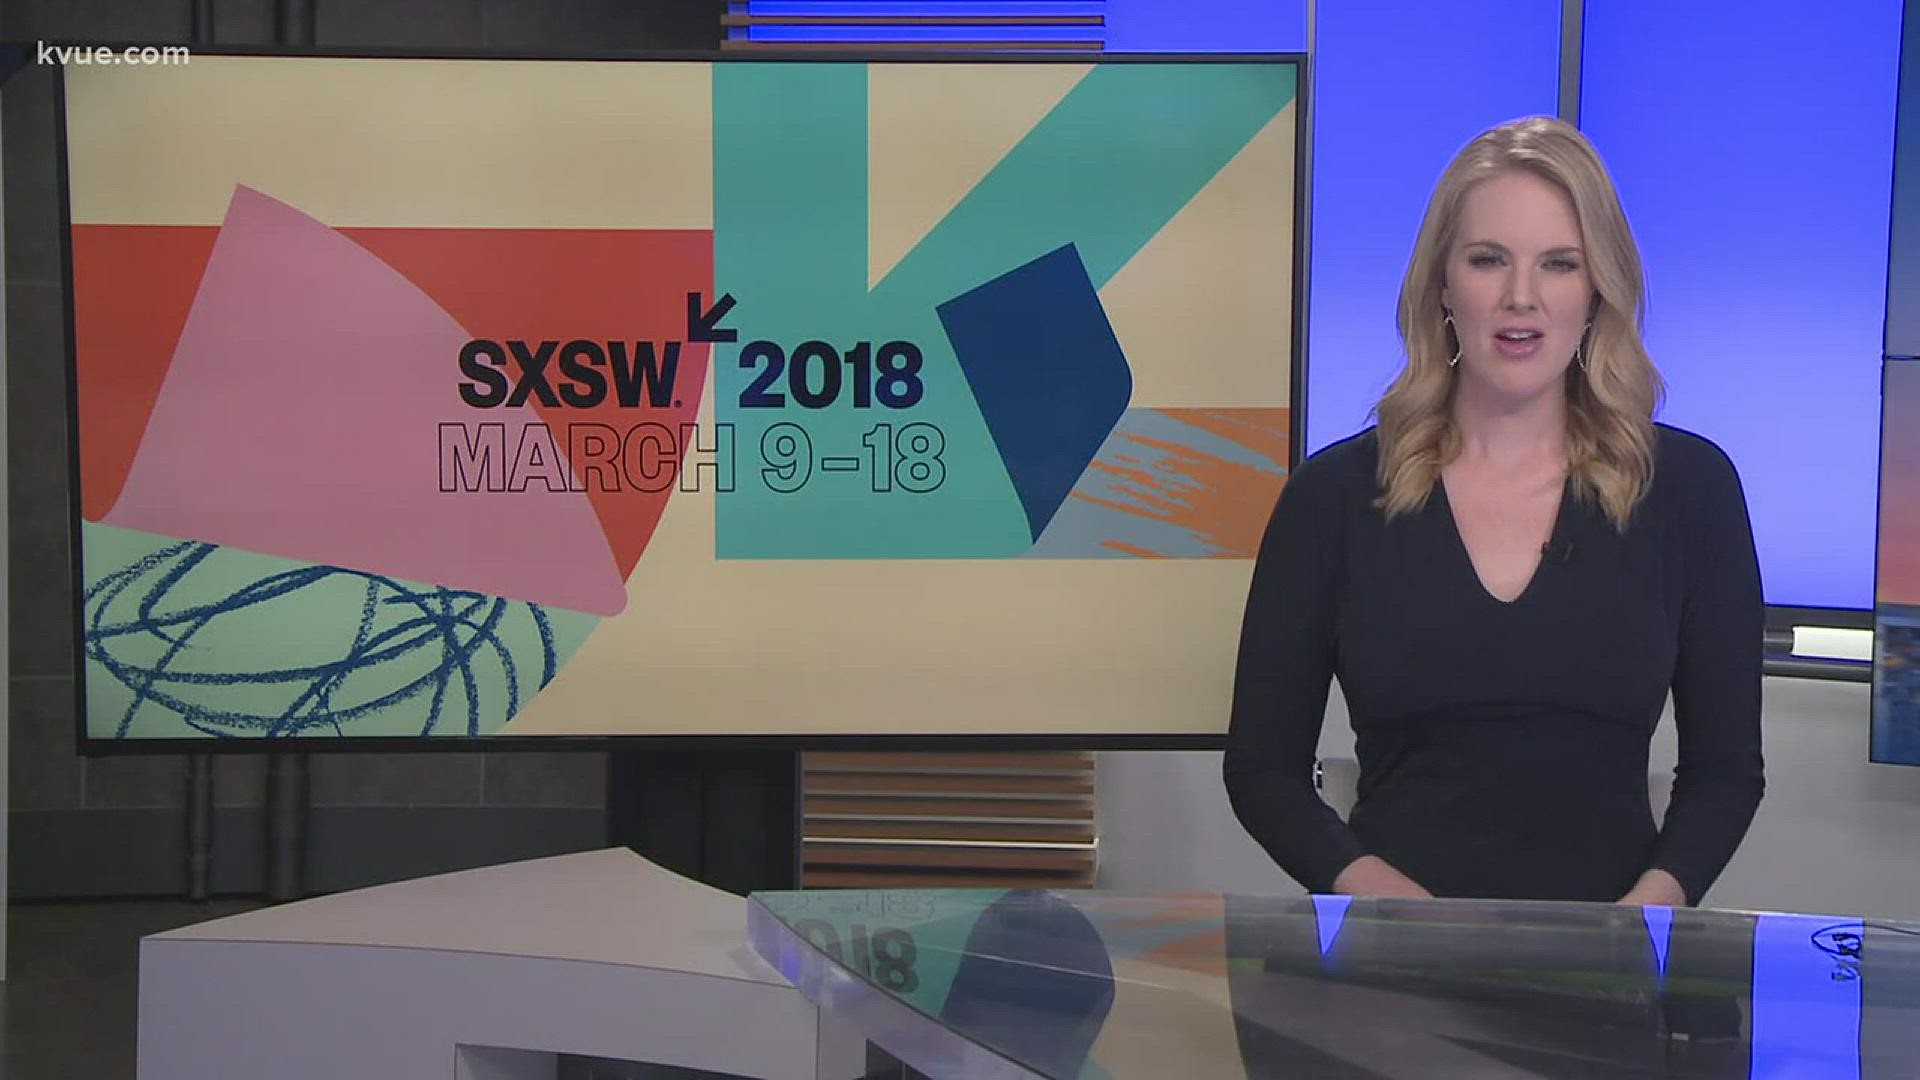 And one of the biggest speakers at SXSW earlier today was former Governor Arnold Schwarzeneger. He sat down with a POLITICO host to discuss his current politics and time as Governor of California.